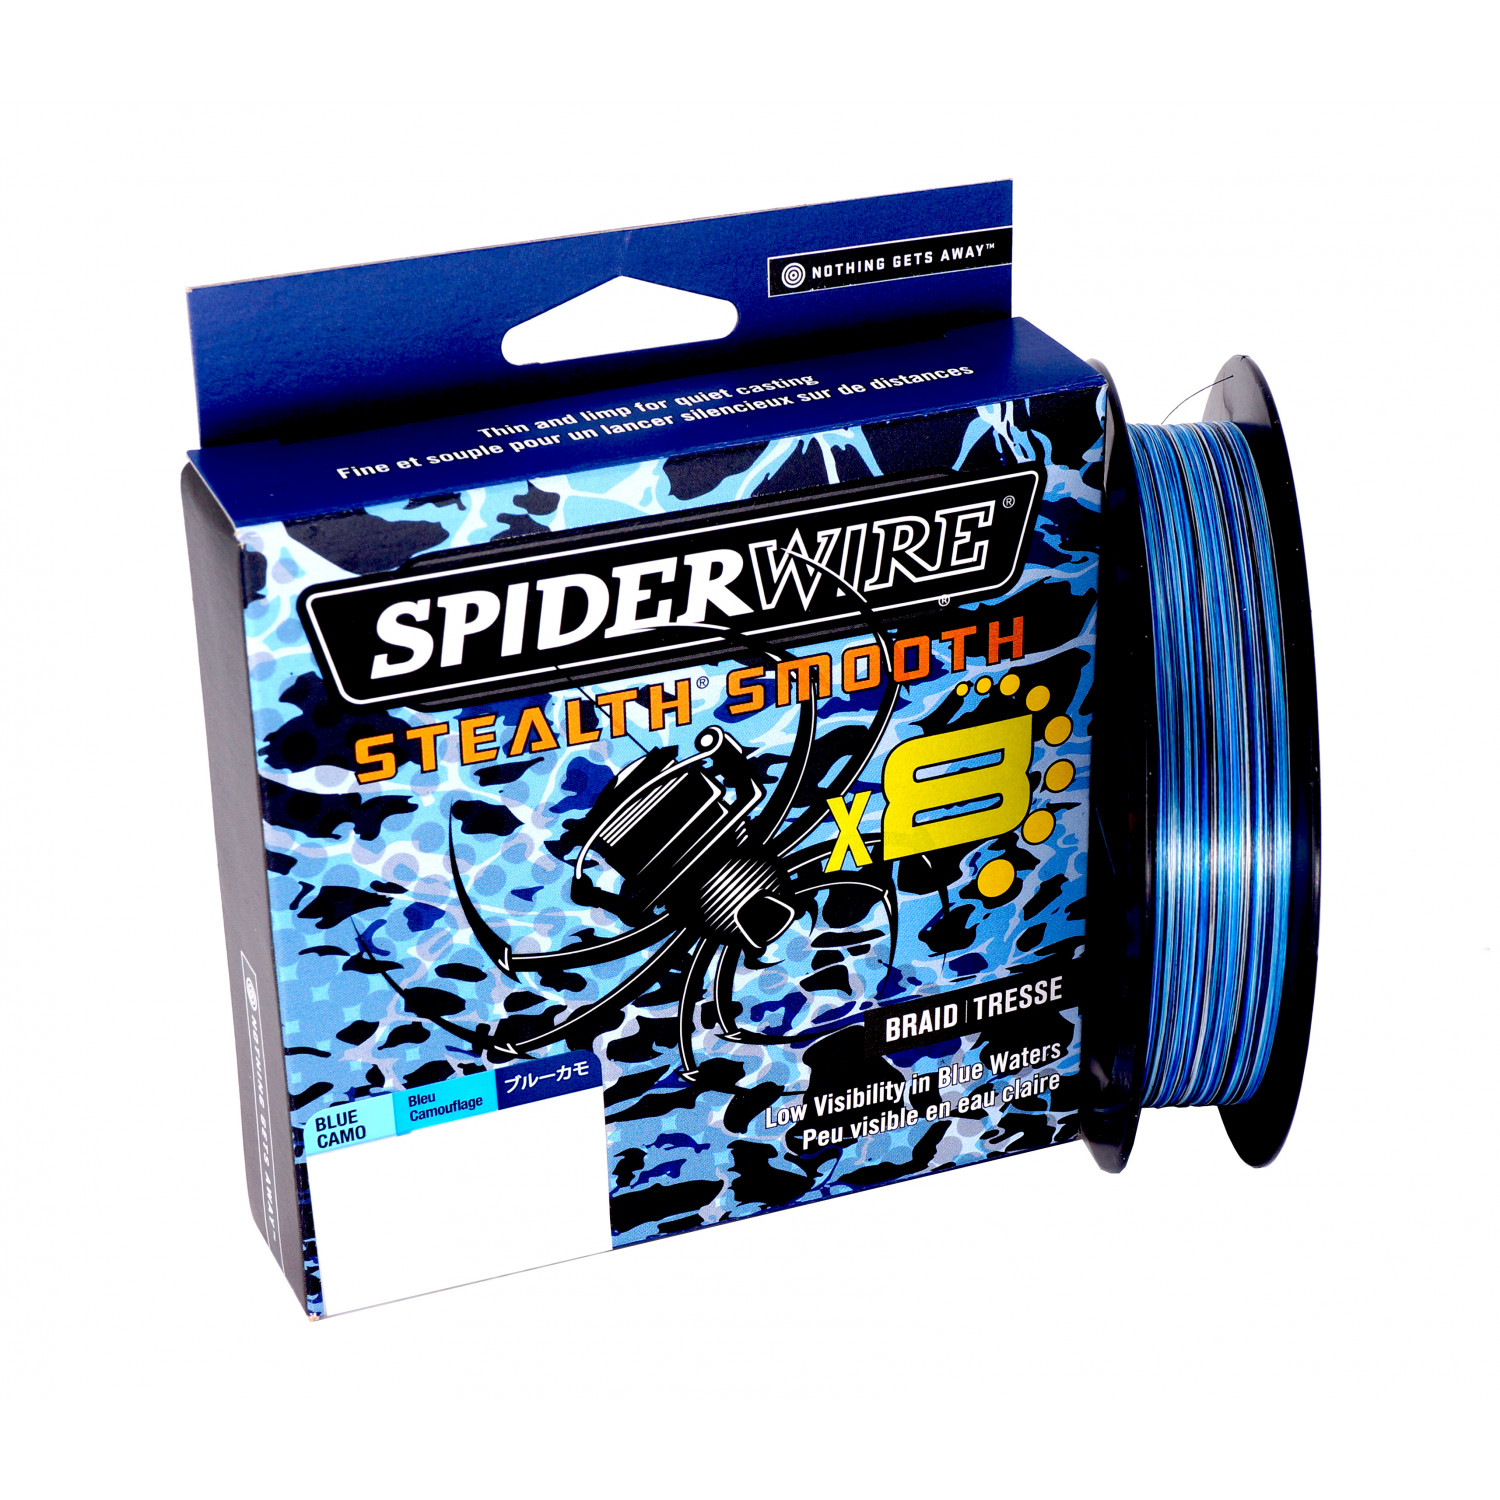 SPIDERWIRE Stealth Smooth braided fishing line camouflage blue 300 1515727  00